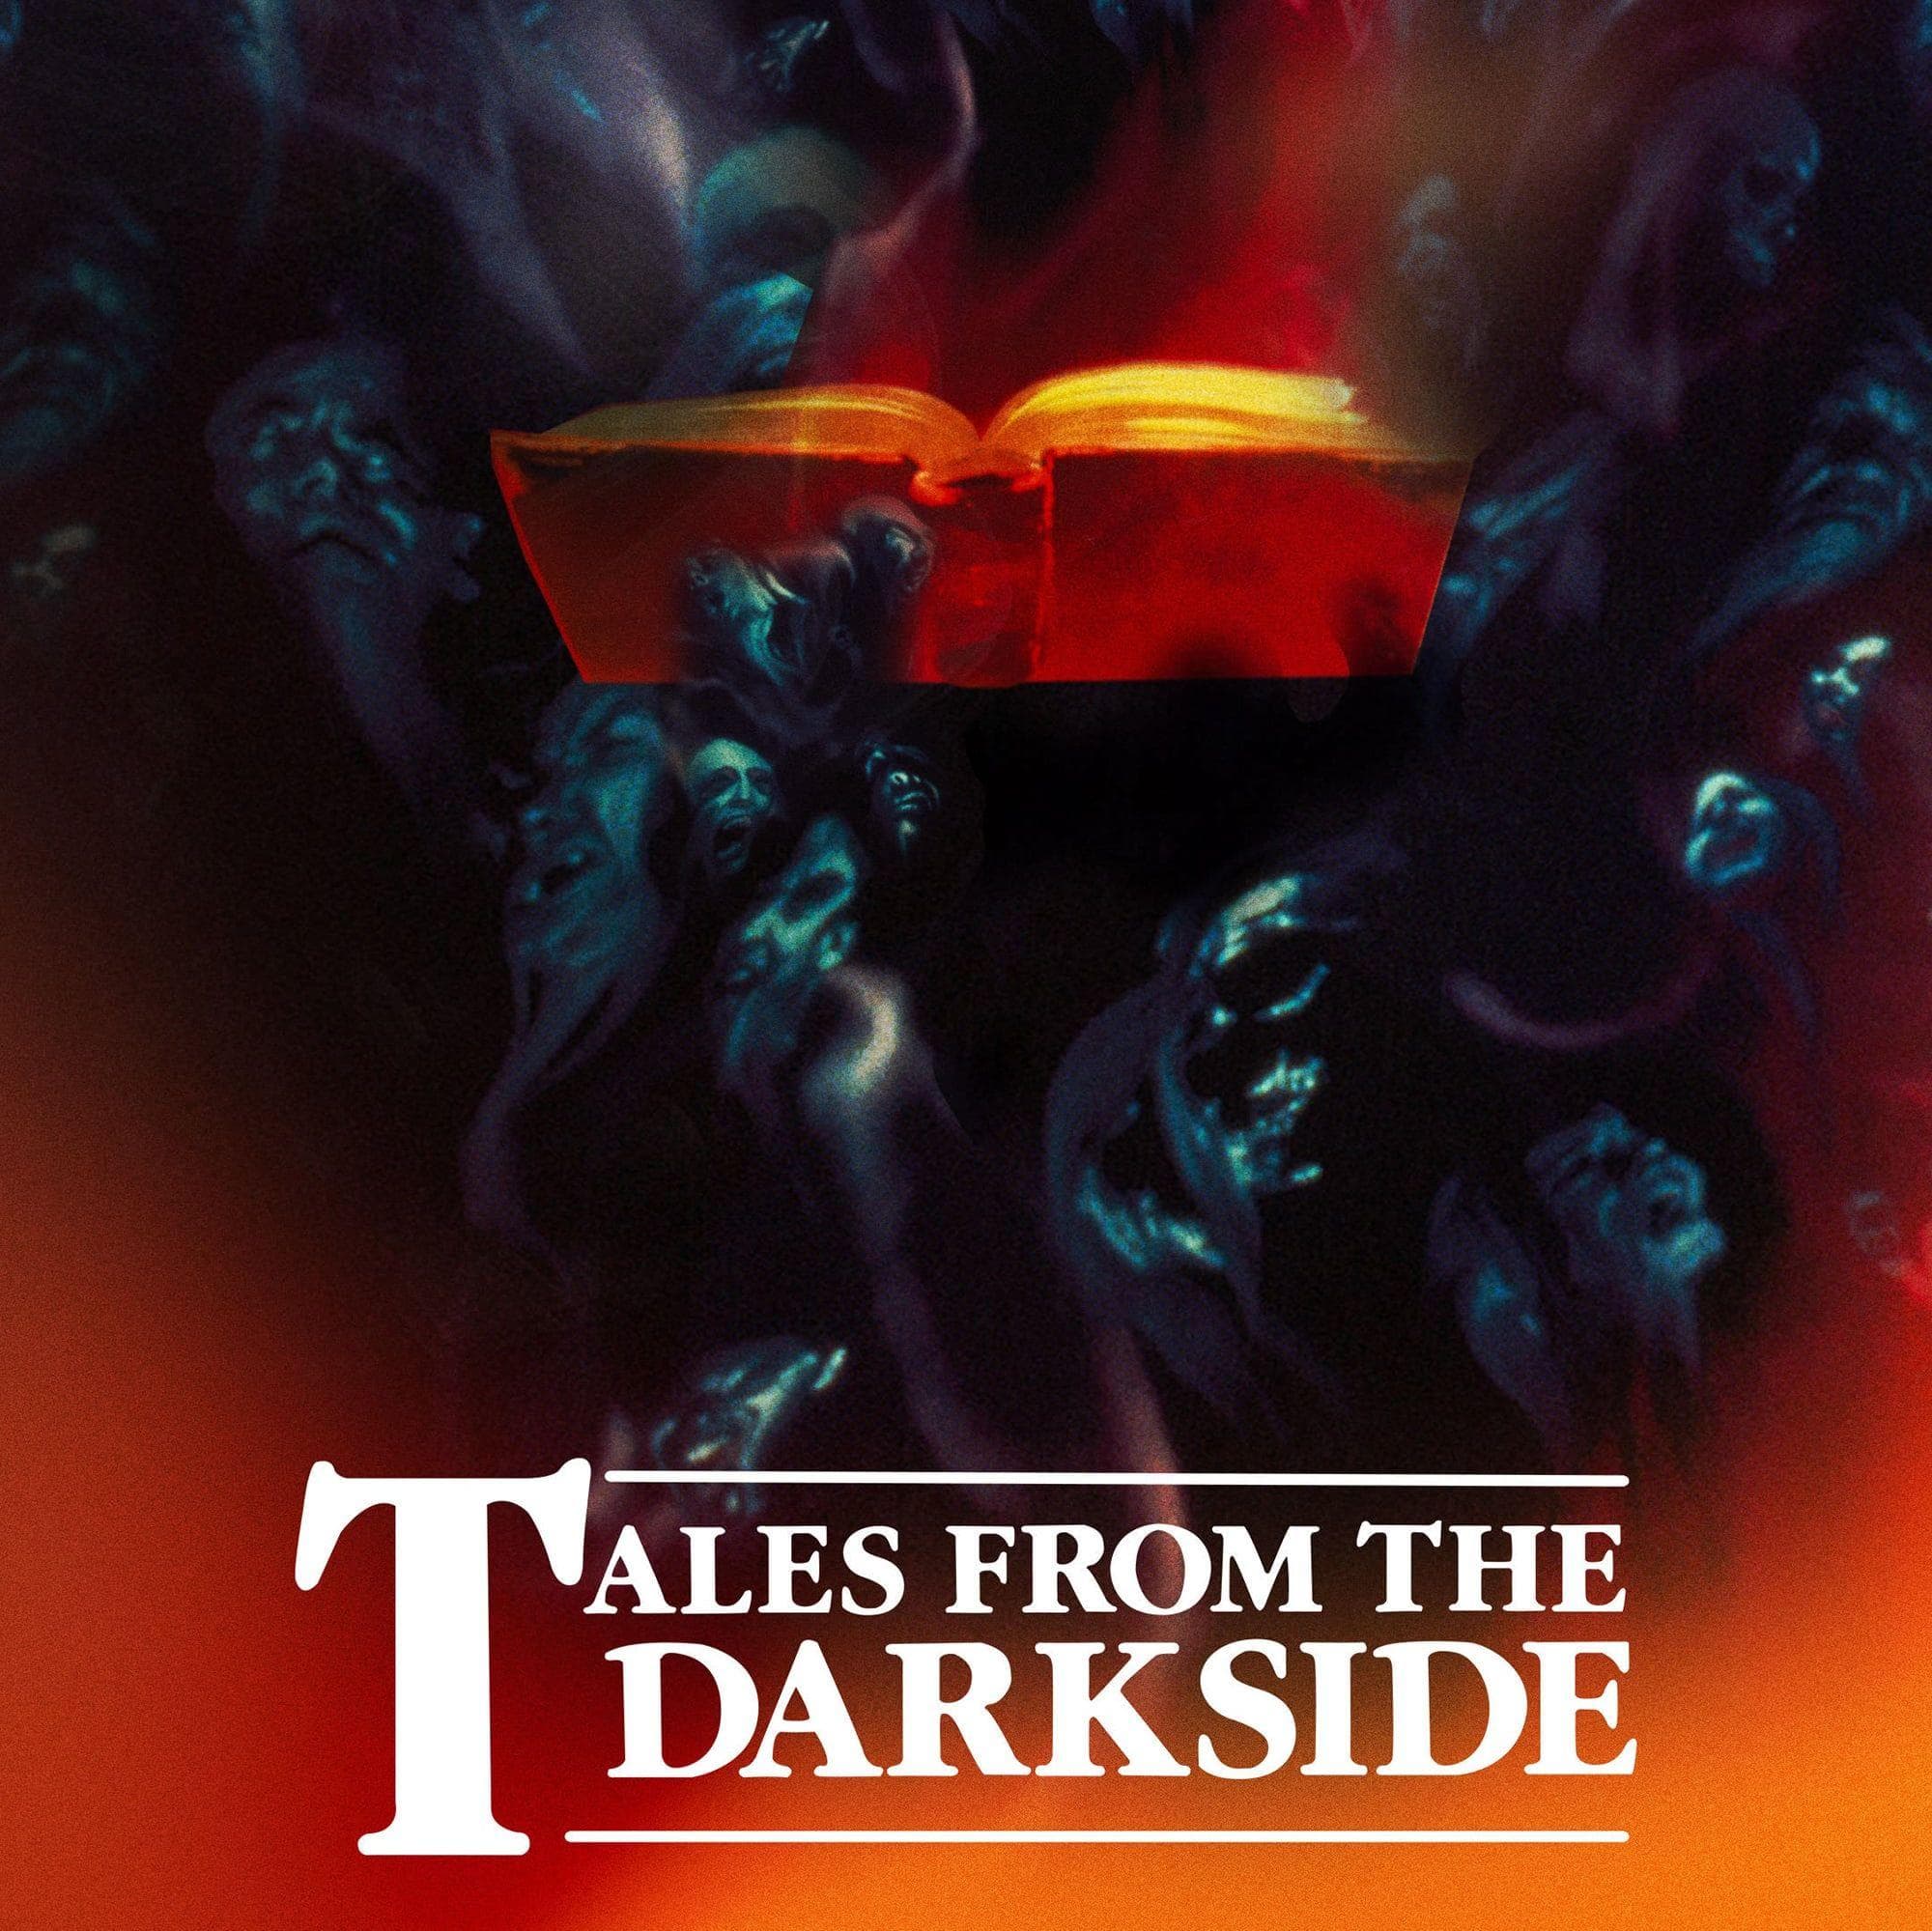 download the dark pictures anthology series